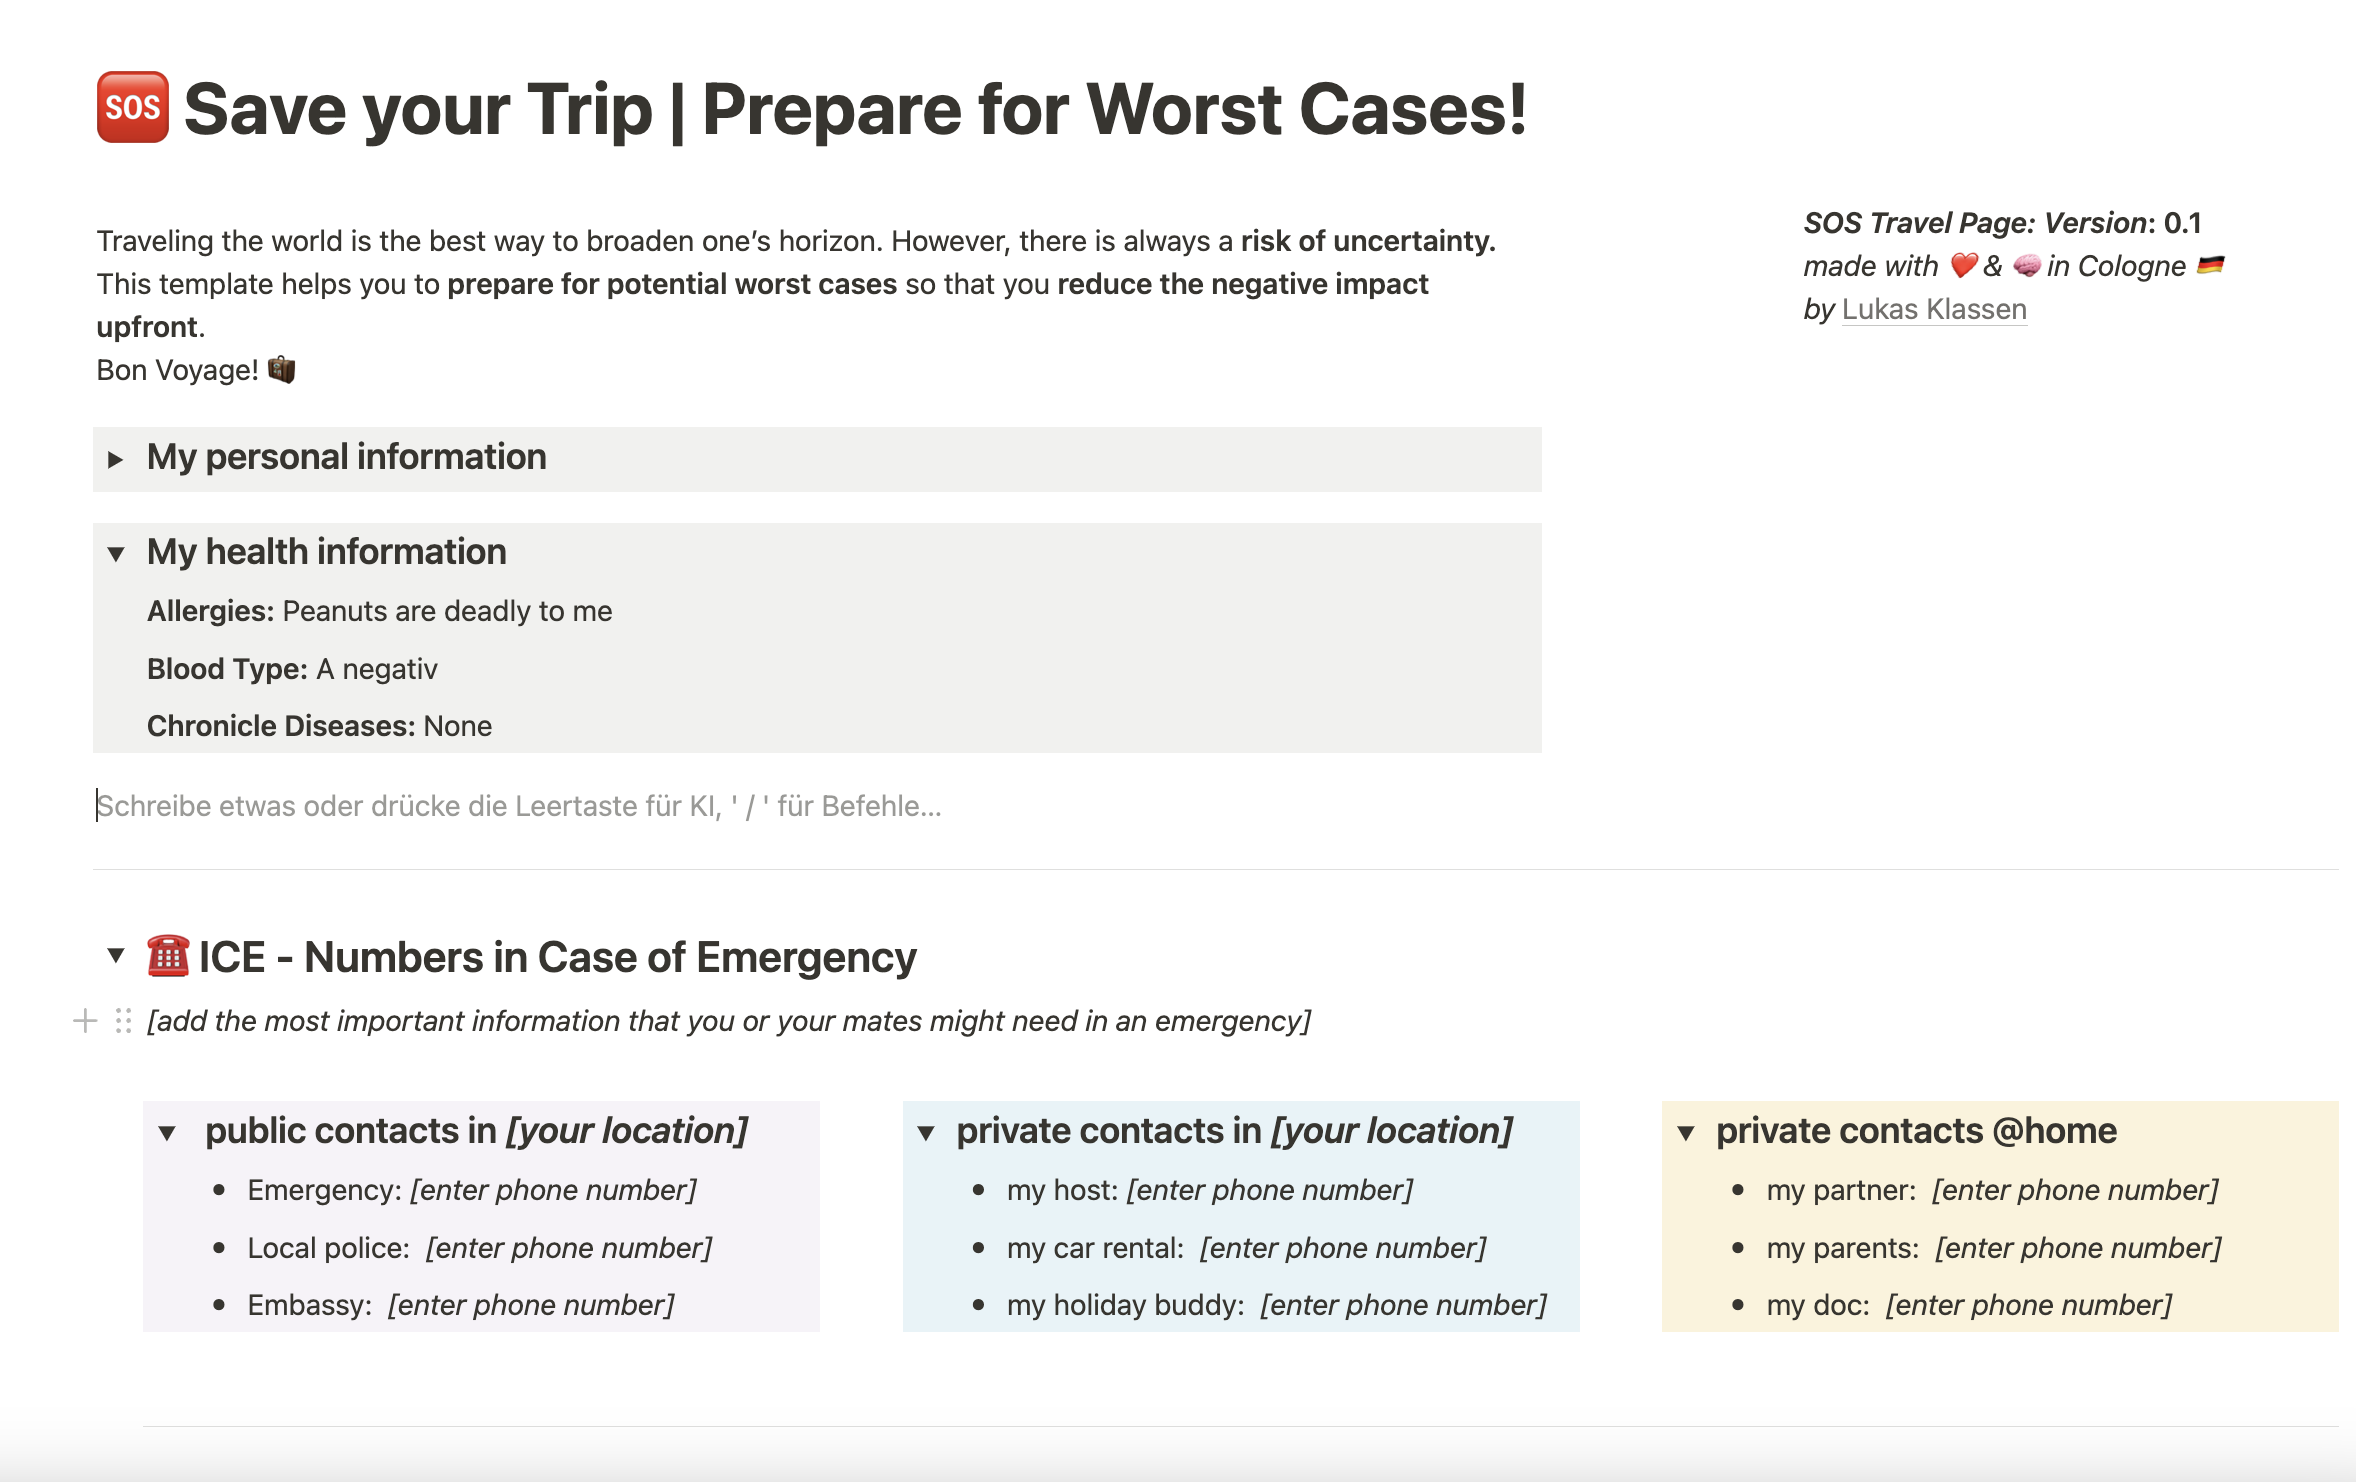 ❤️ Traveling the world is the best way to broaden one’s horizon. 
🆘 However, there is always a risk of uncertainty. 
🛡️ This template helps you to prepare for worst cases and reduce negative impact upfront. 
🧘‍♀️ Get peace of mind by being prepared